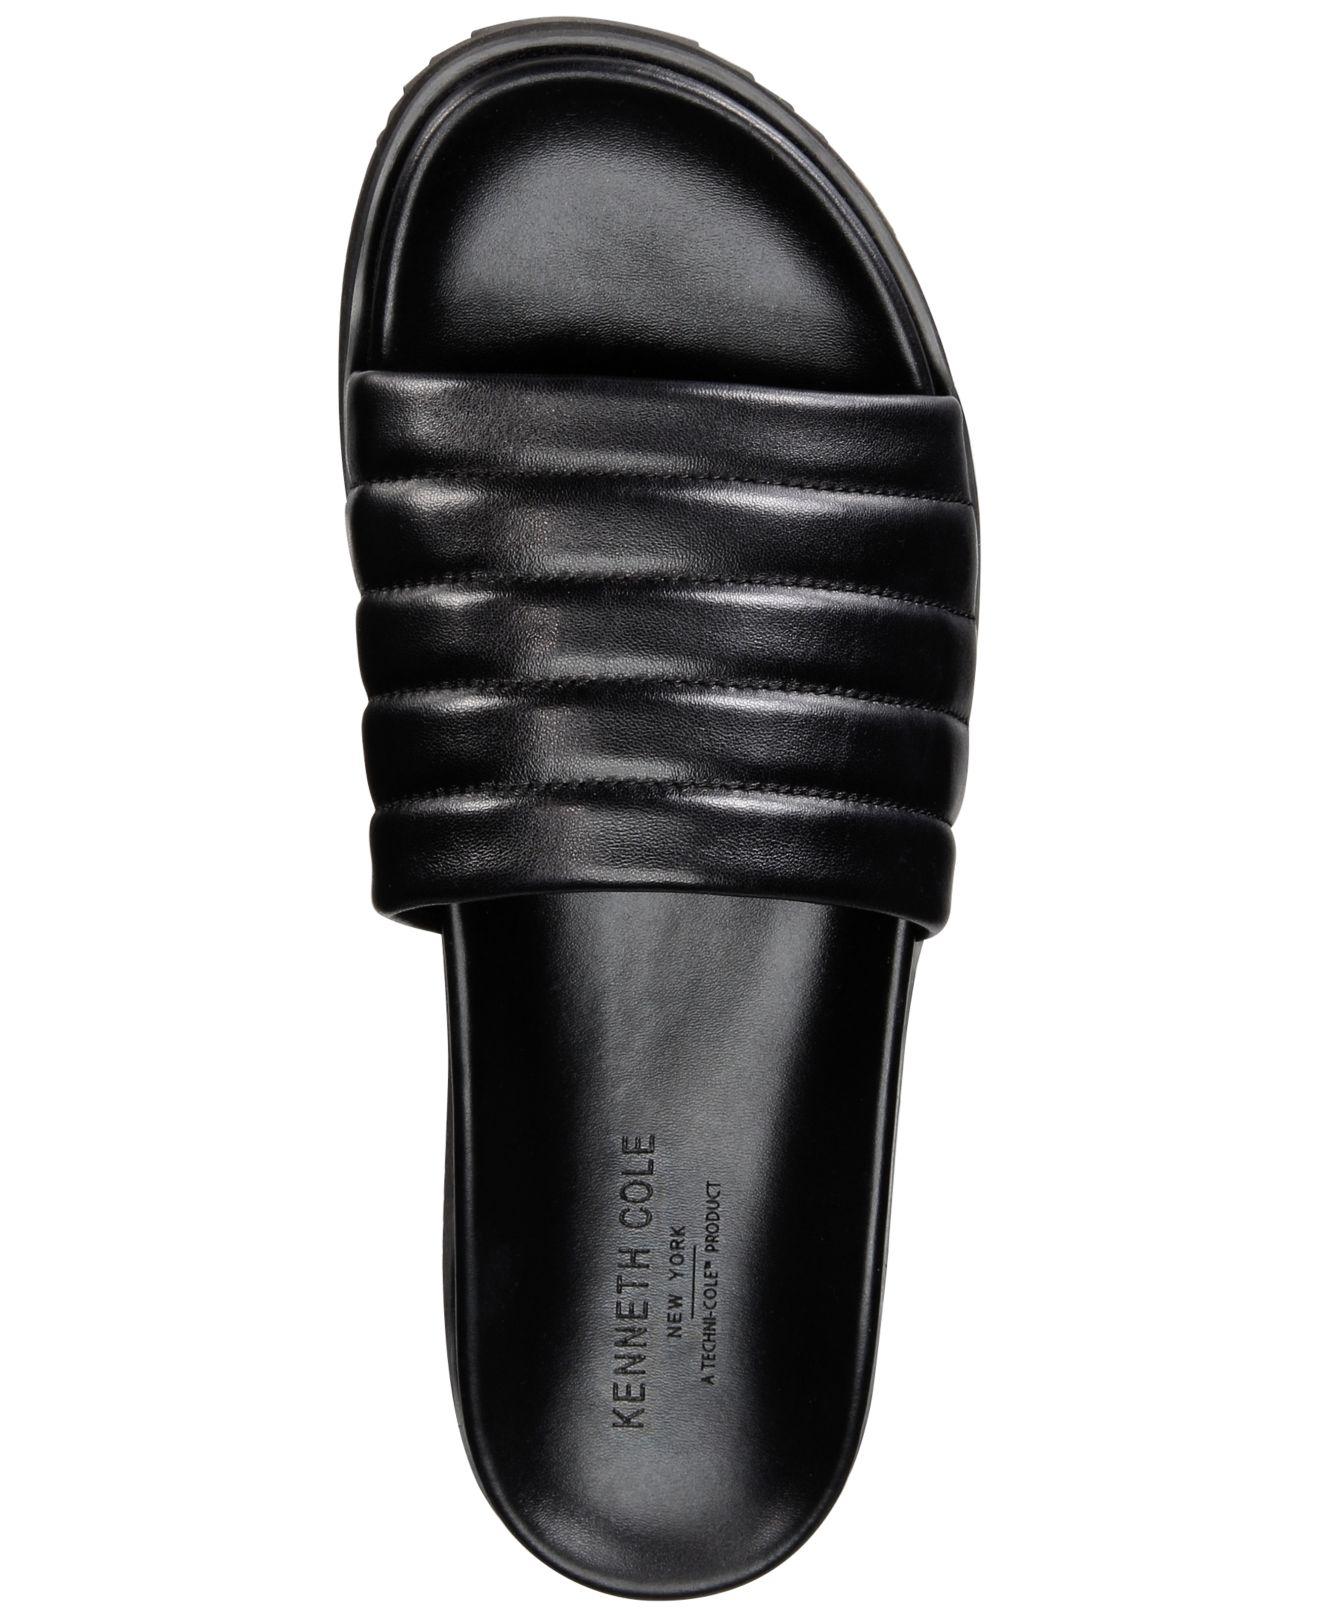 Kenneth Cole Story Quilted Leather Slide Sandals in Black for Men - Lyst